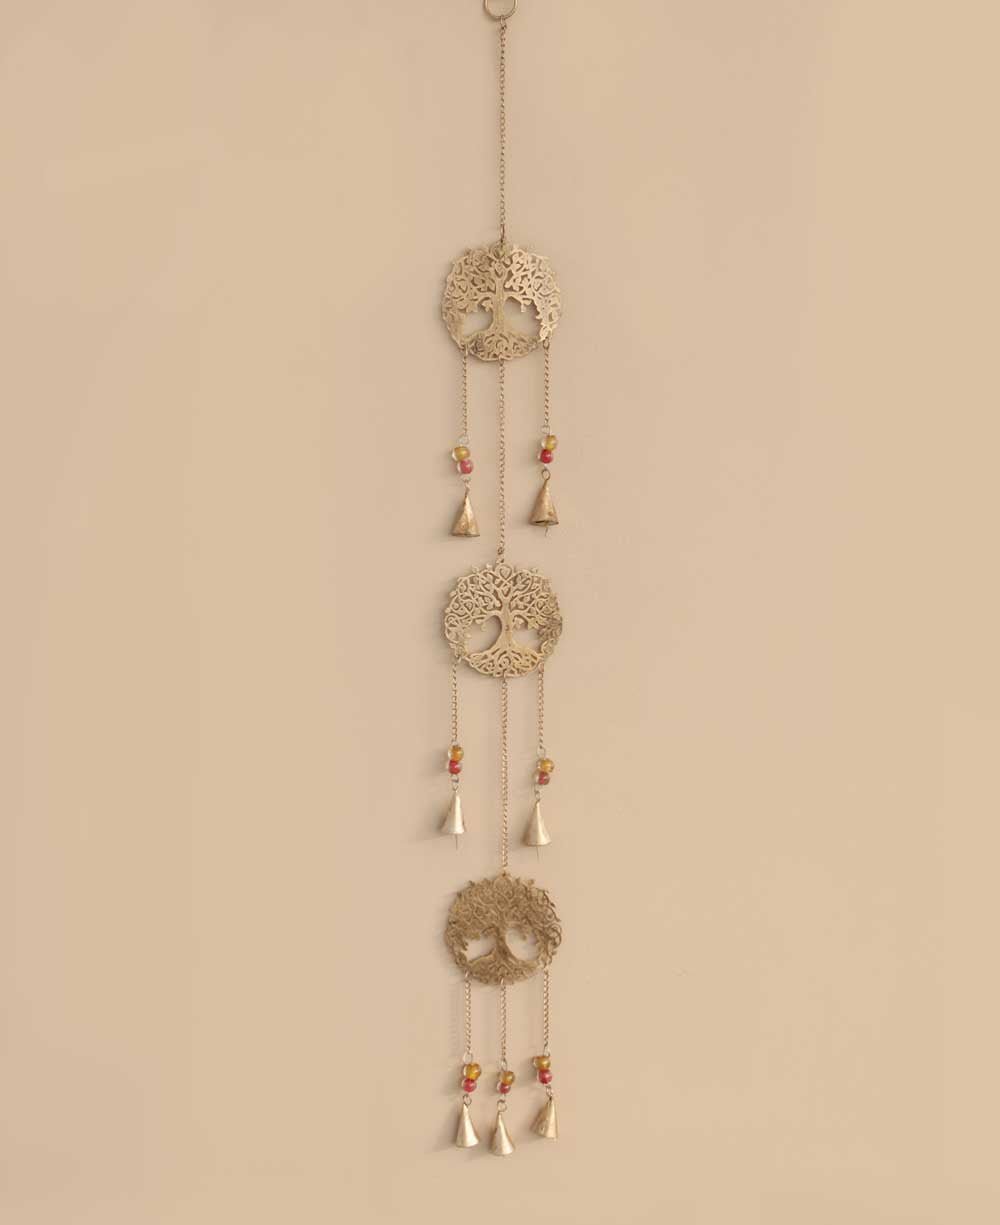 Fairtrade Three Tier Tree of Life Bell Chime Wall Hanging - Wind Chimes